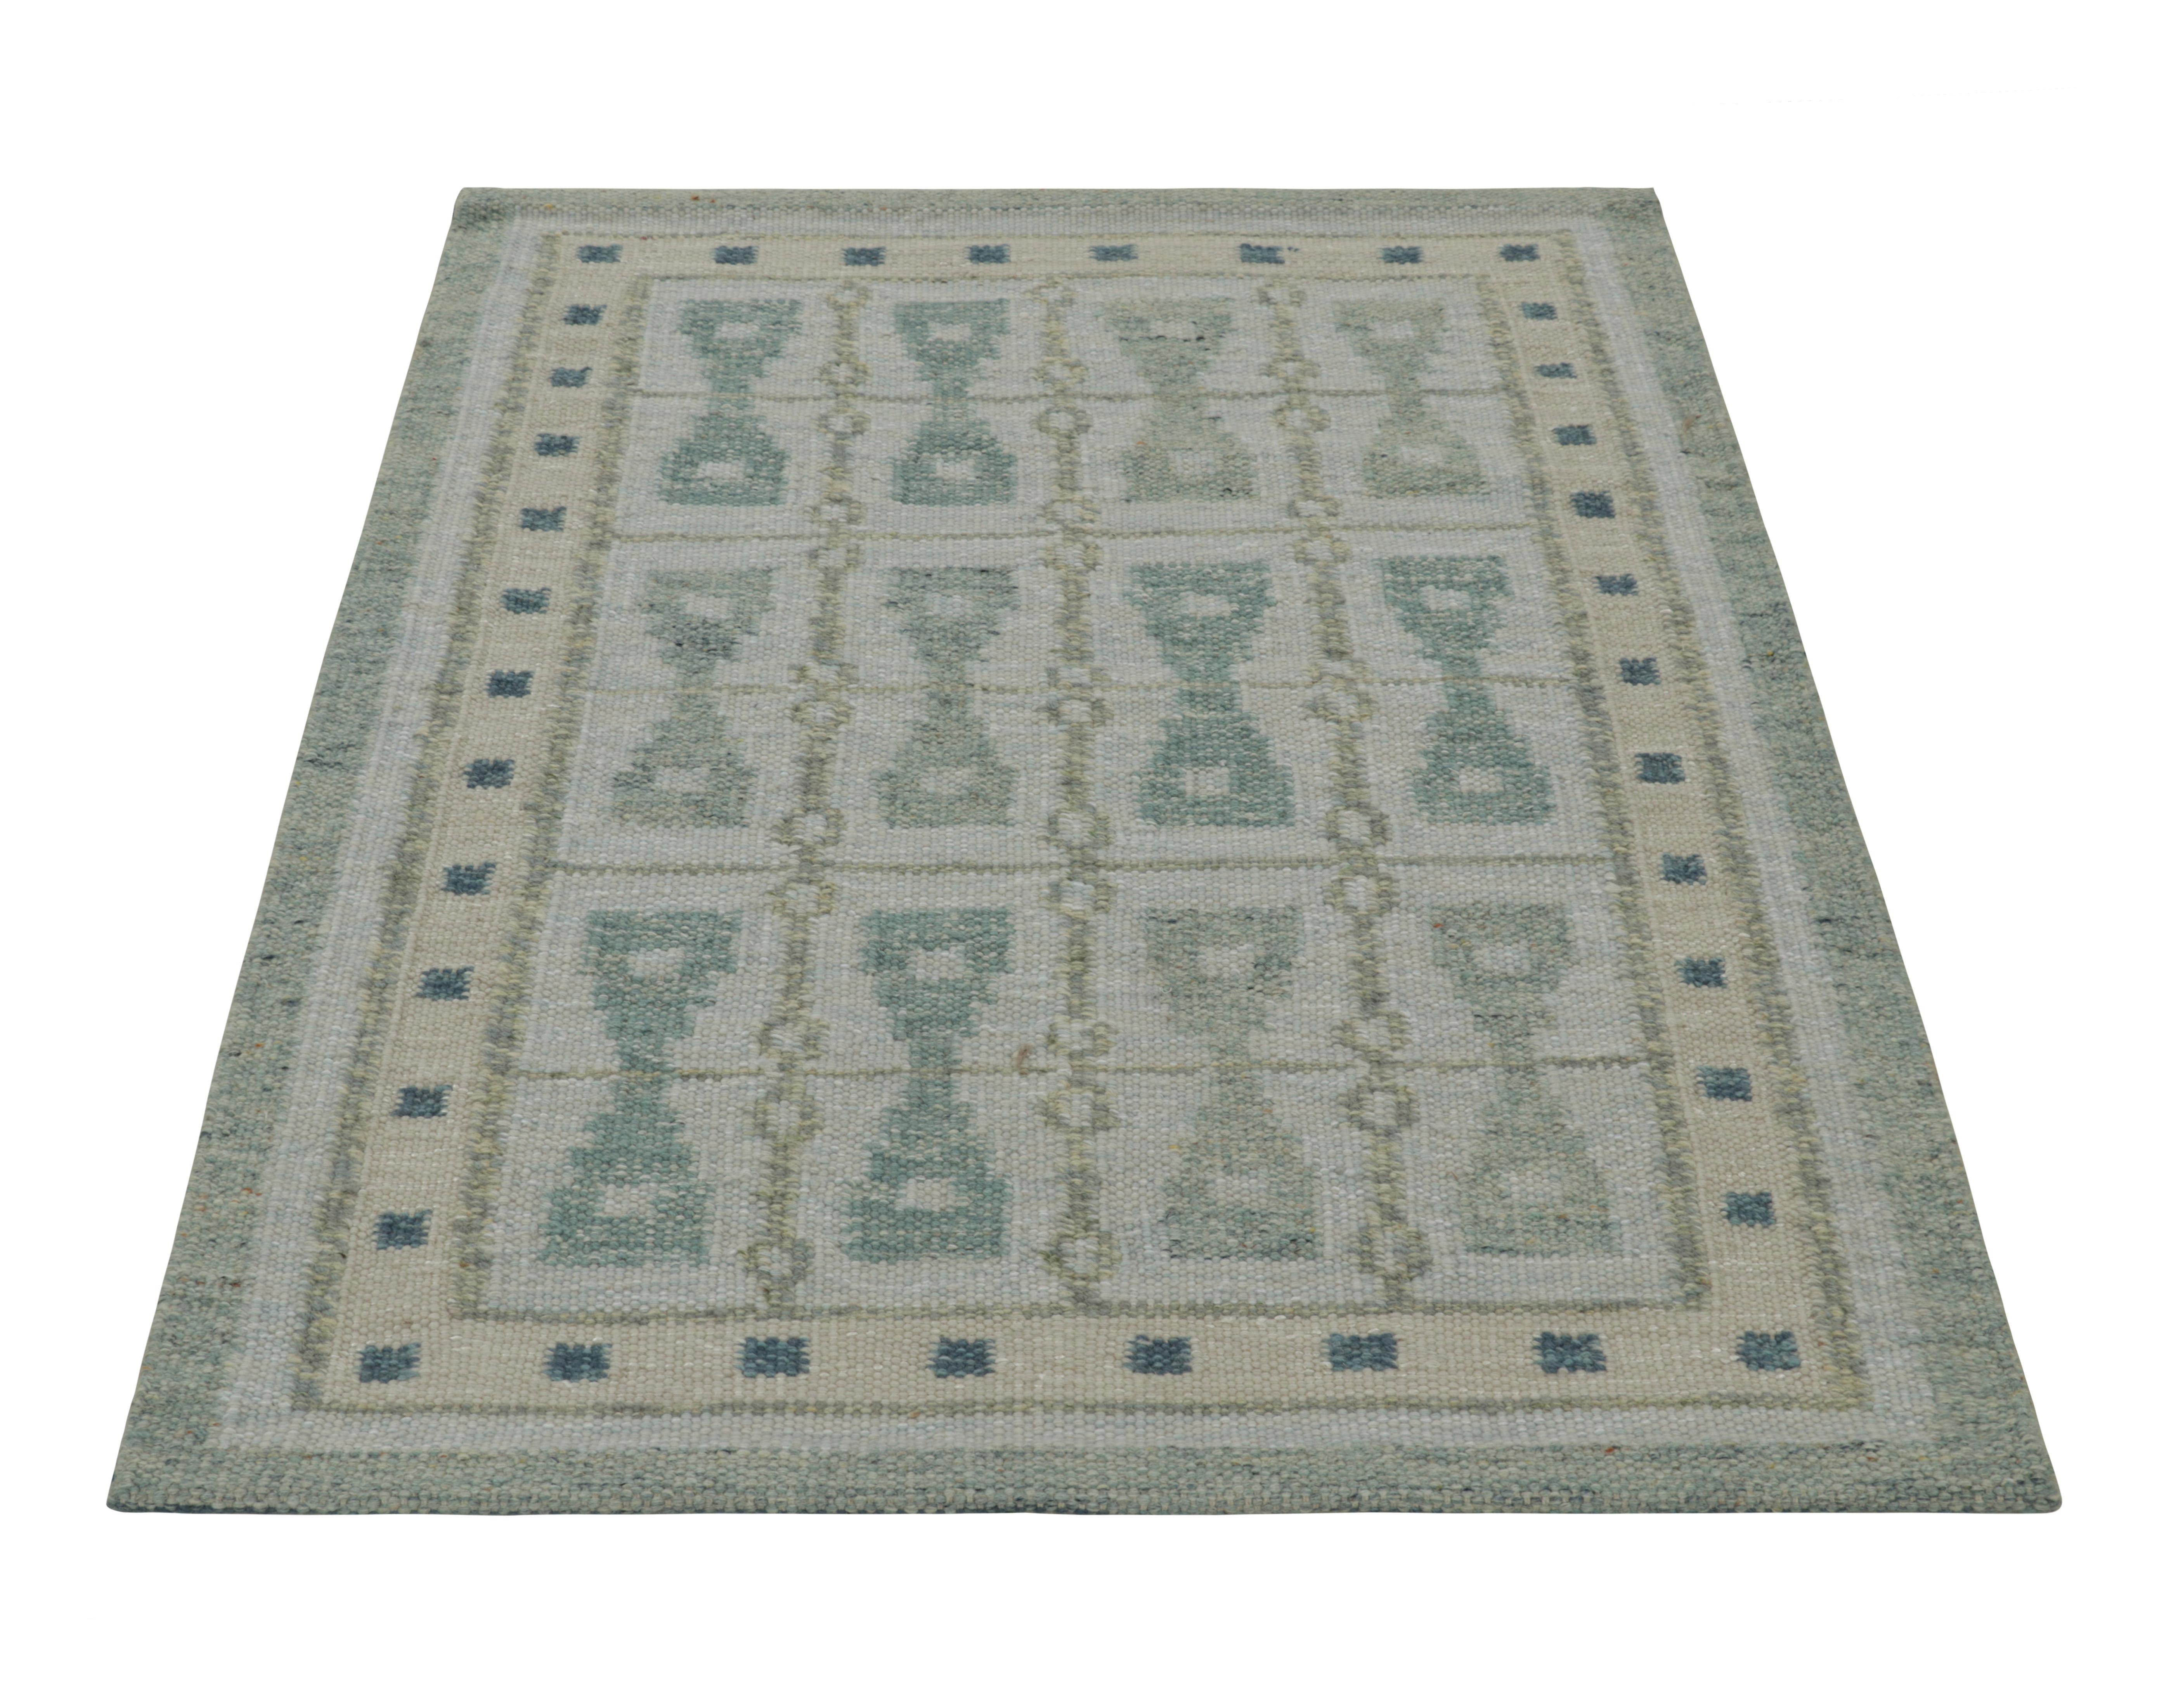 Indian Rug & Kilim’s Scandinavian Style Square Rug in Blue, with Hourglass Patterns For Sale